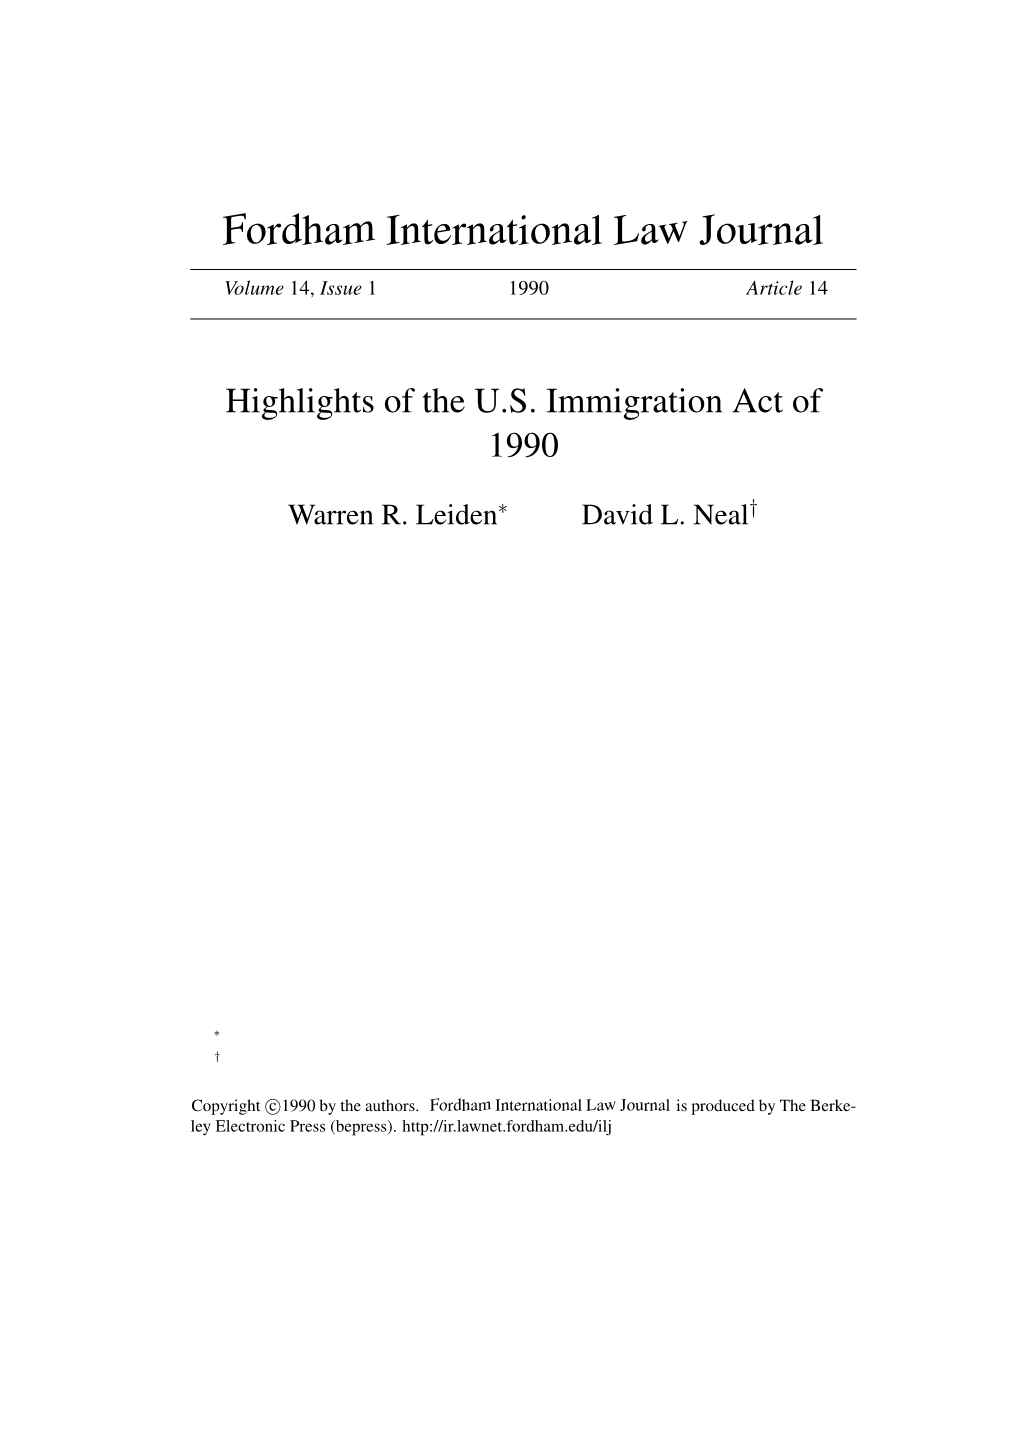 Highlights of the U.S. Immigration Act of 1990